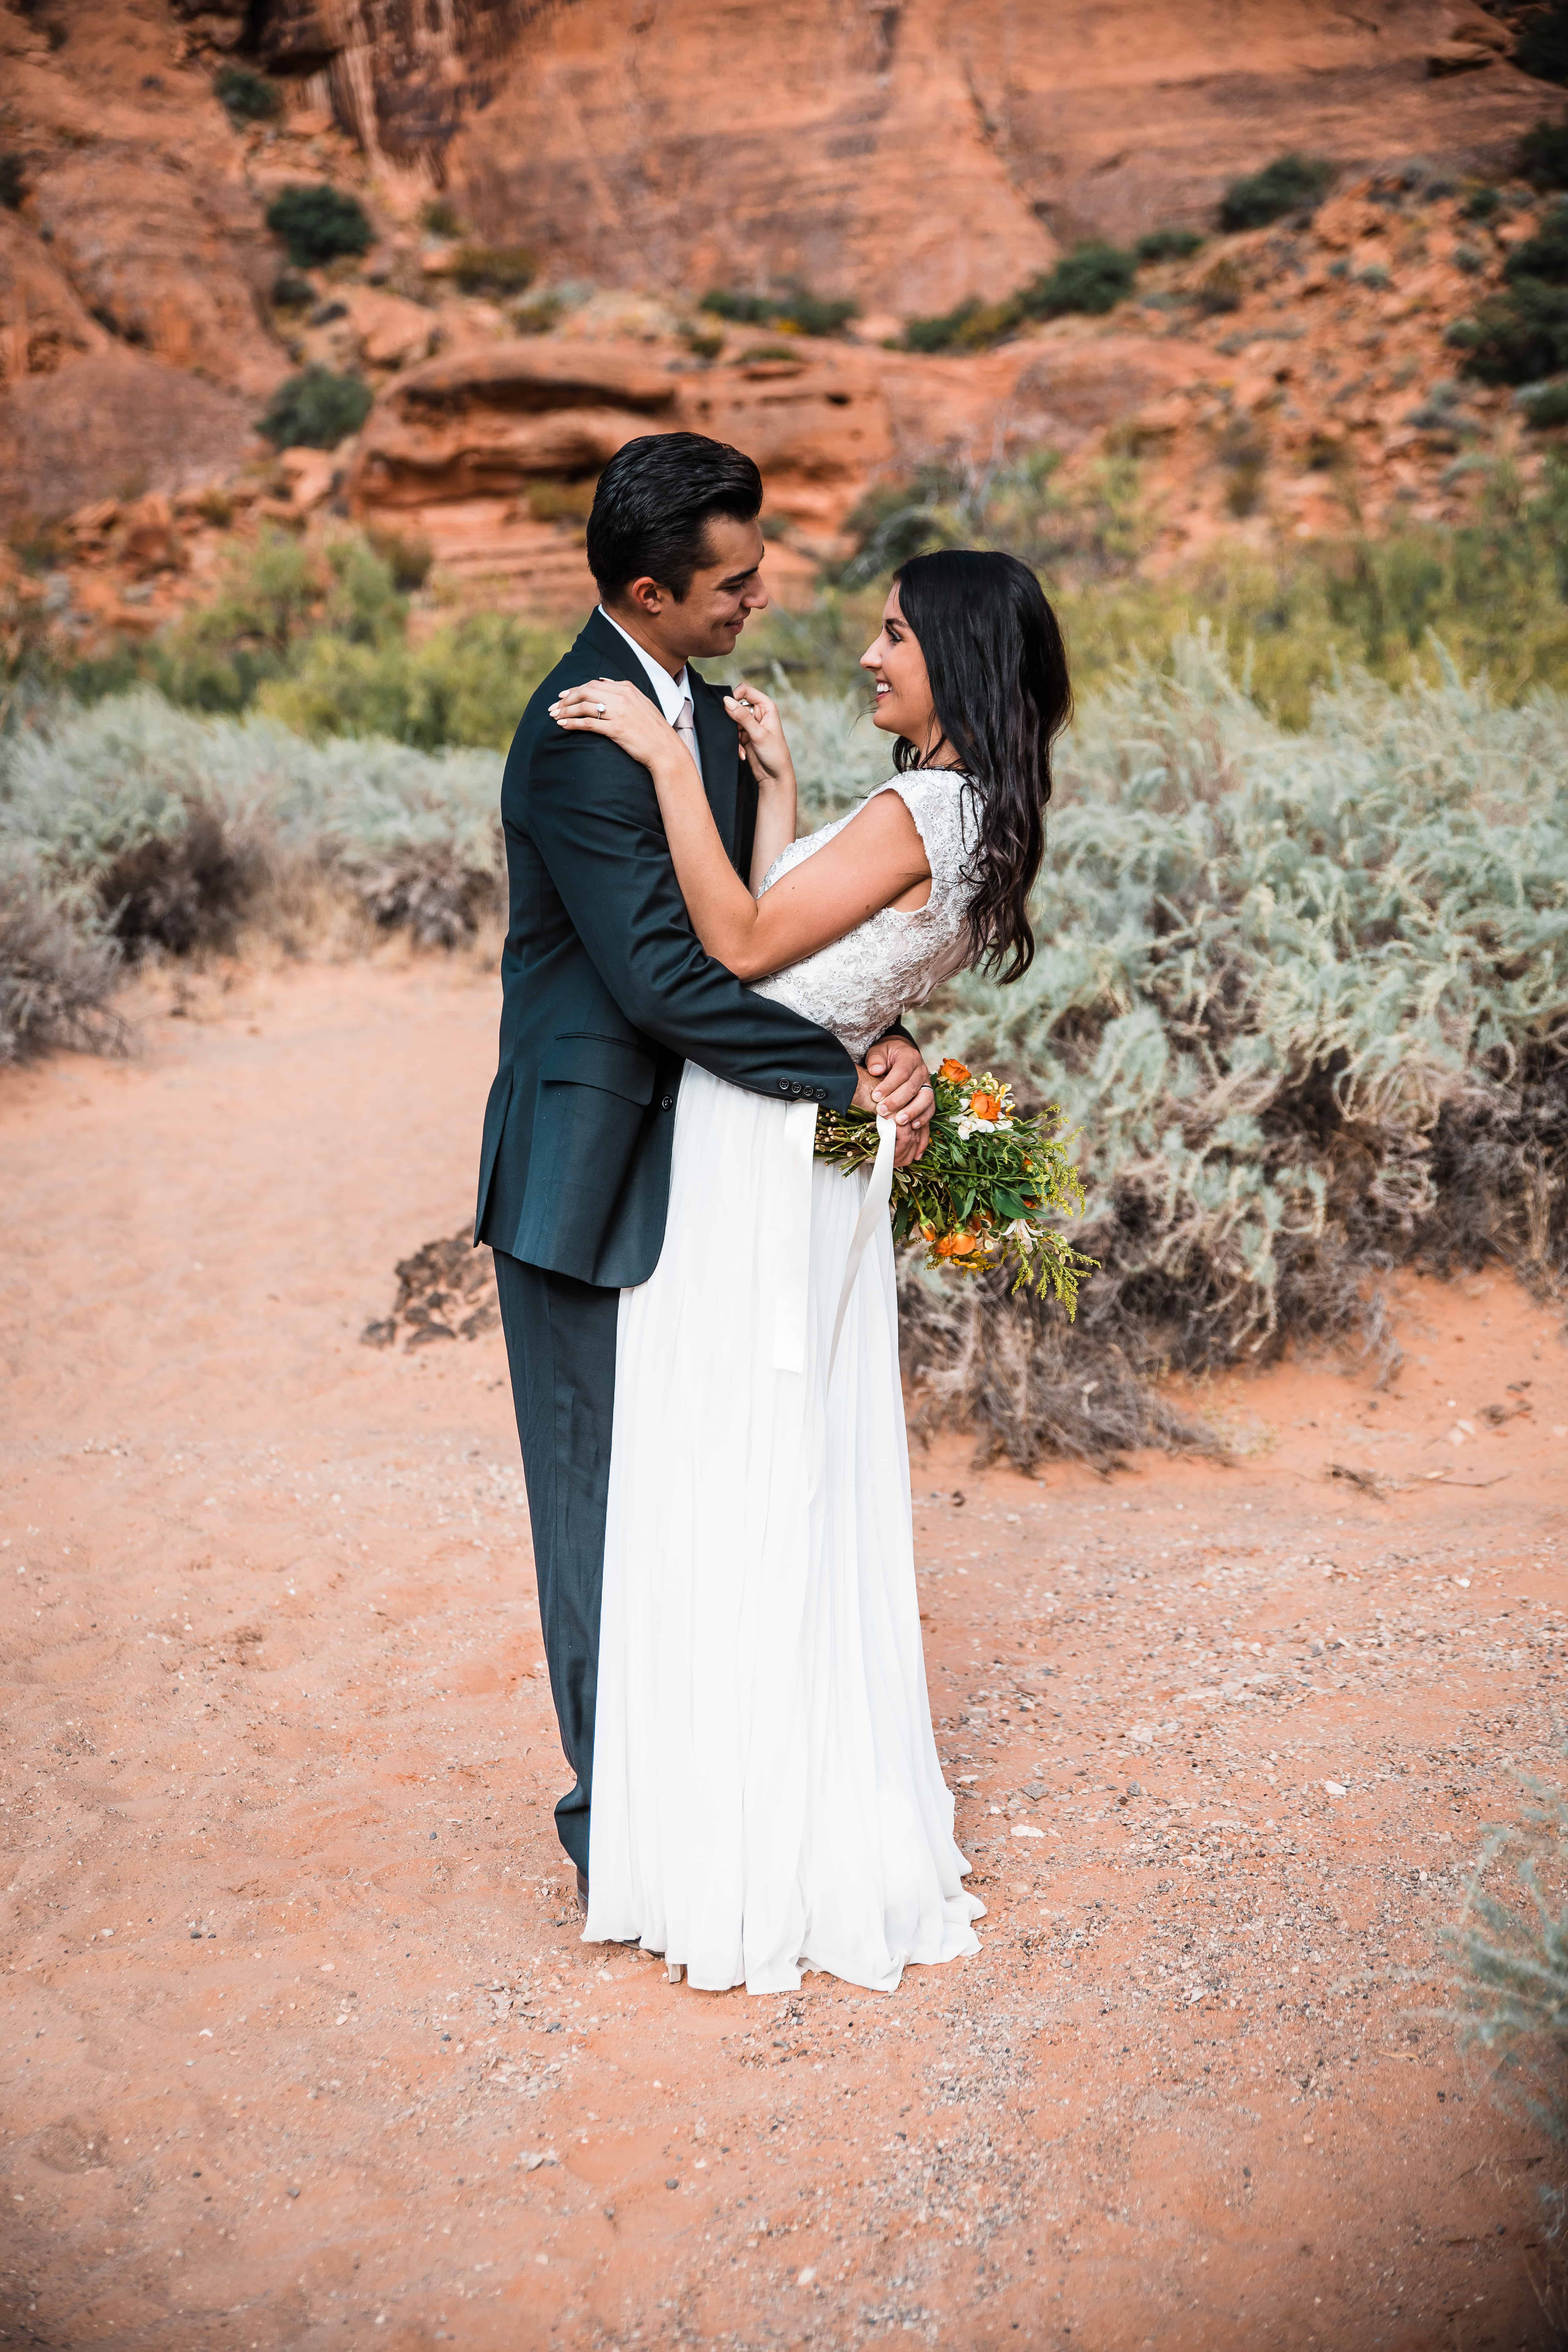 Eloping in southern Utah, the couple exchanges vows